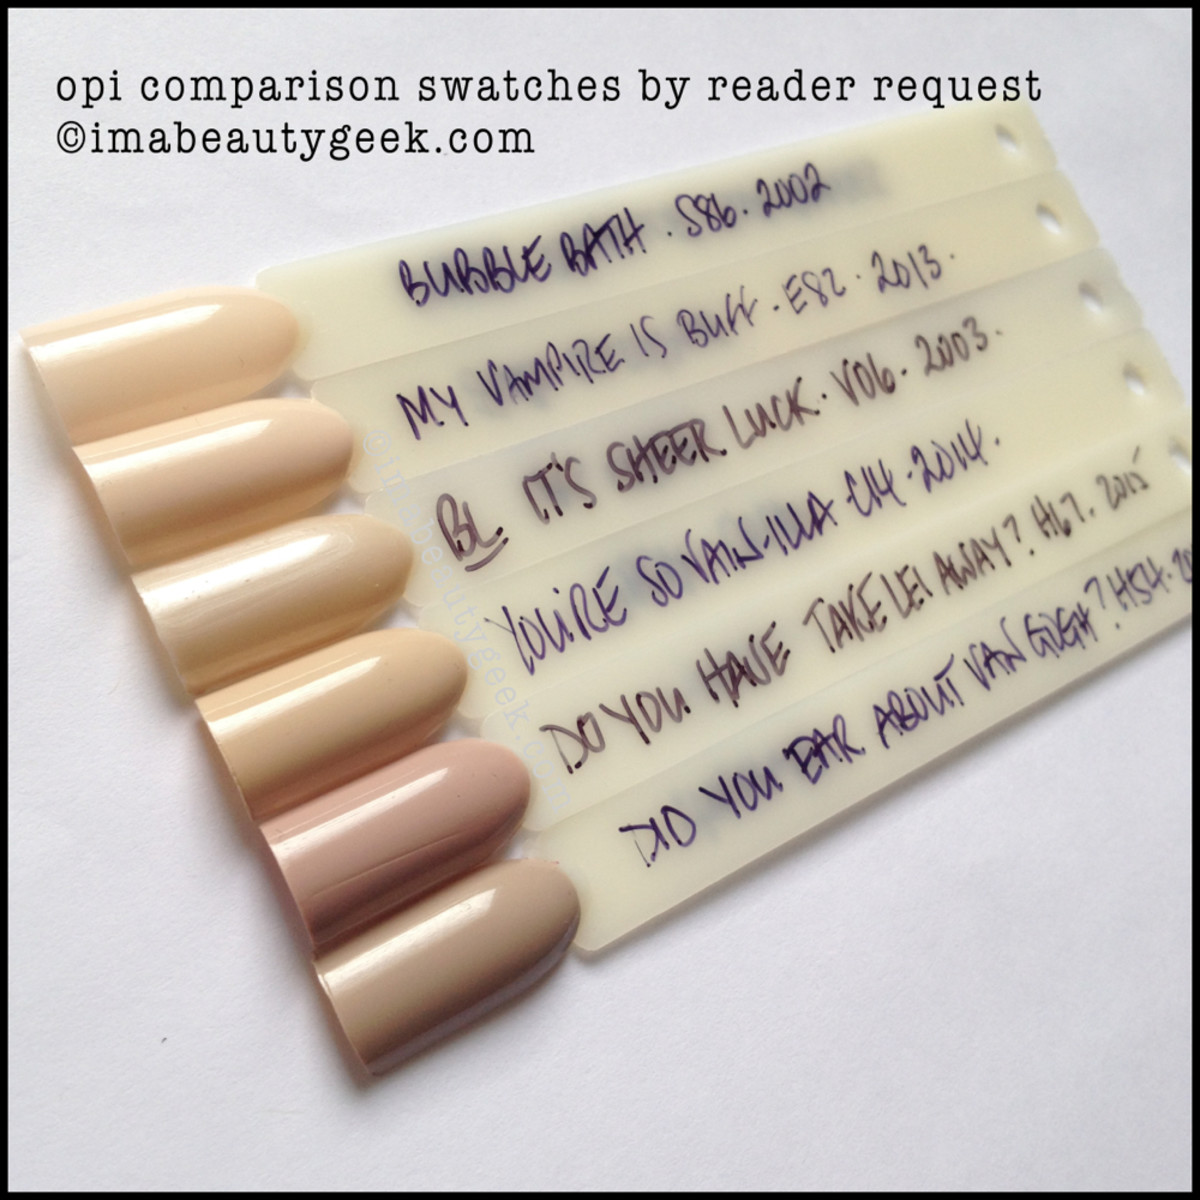 opi hawaii comparison swatches do you take lei-away?